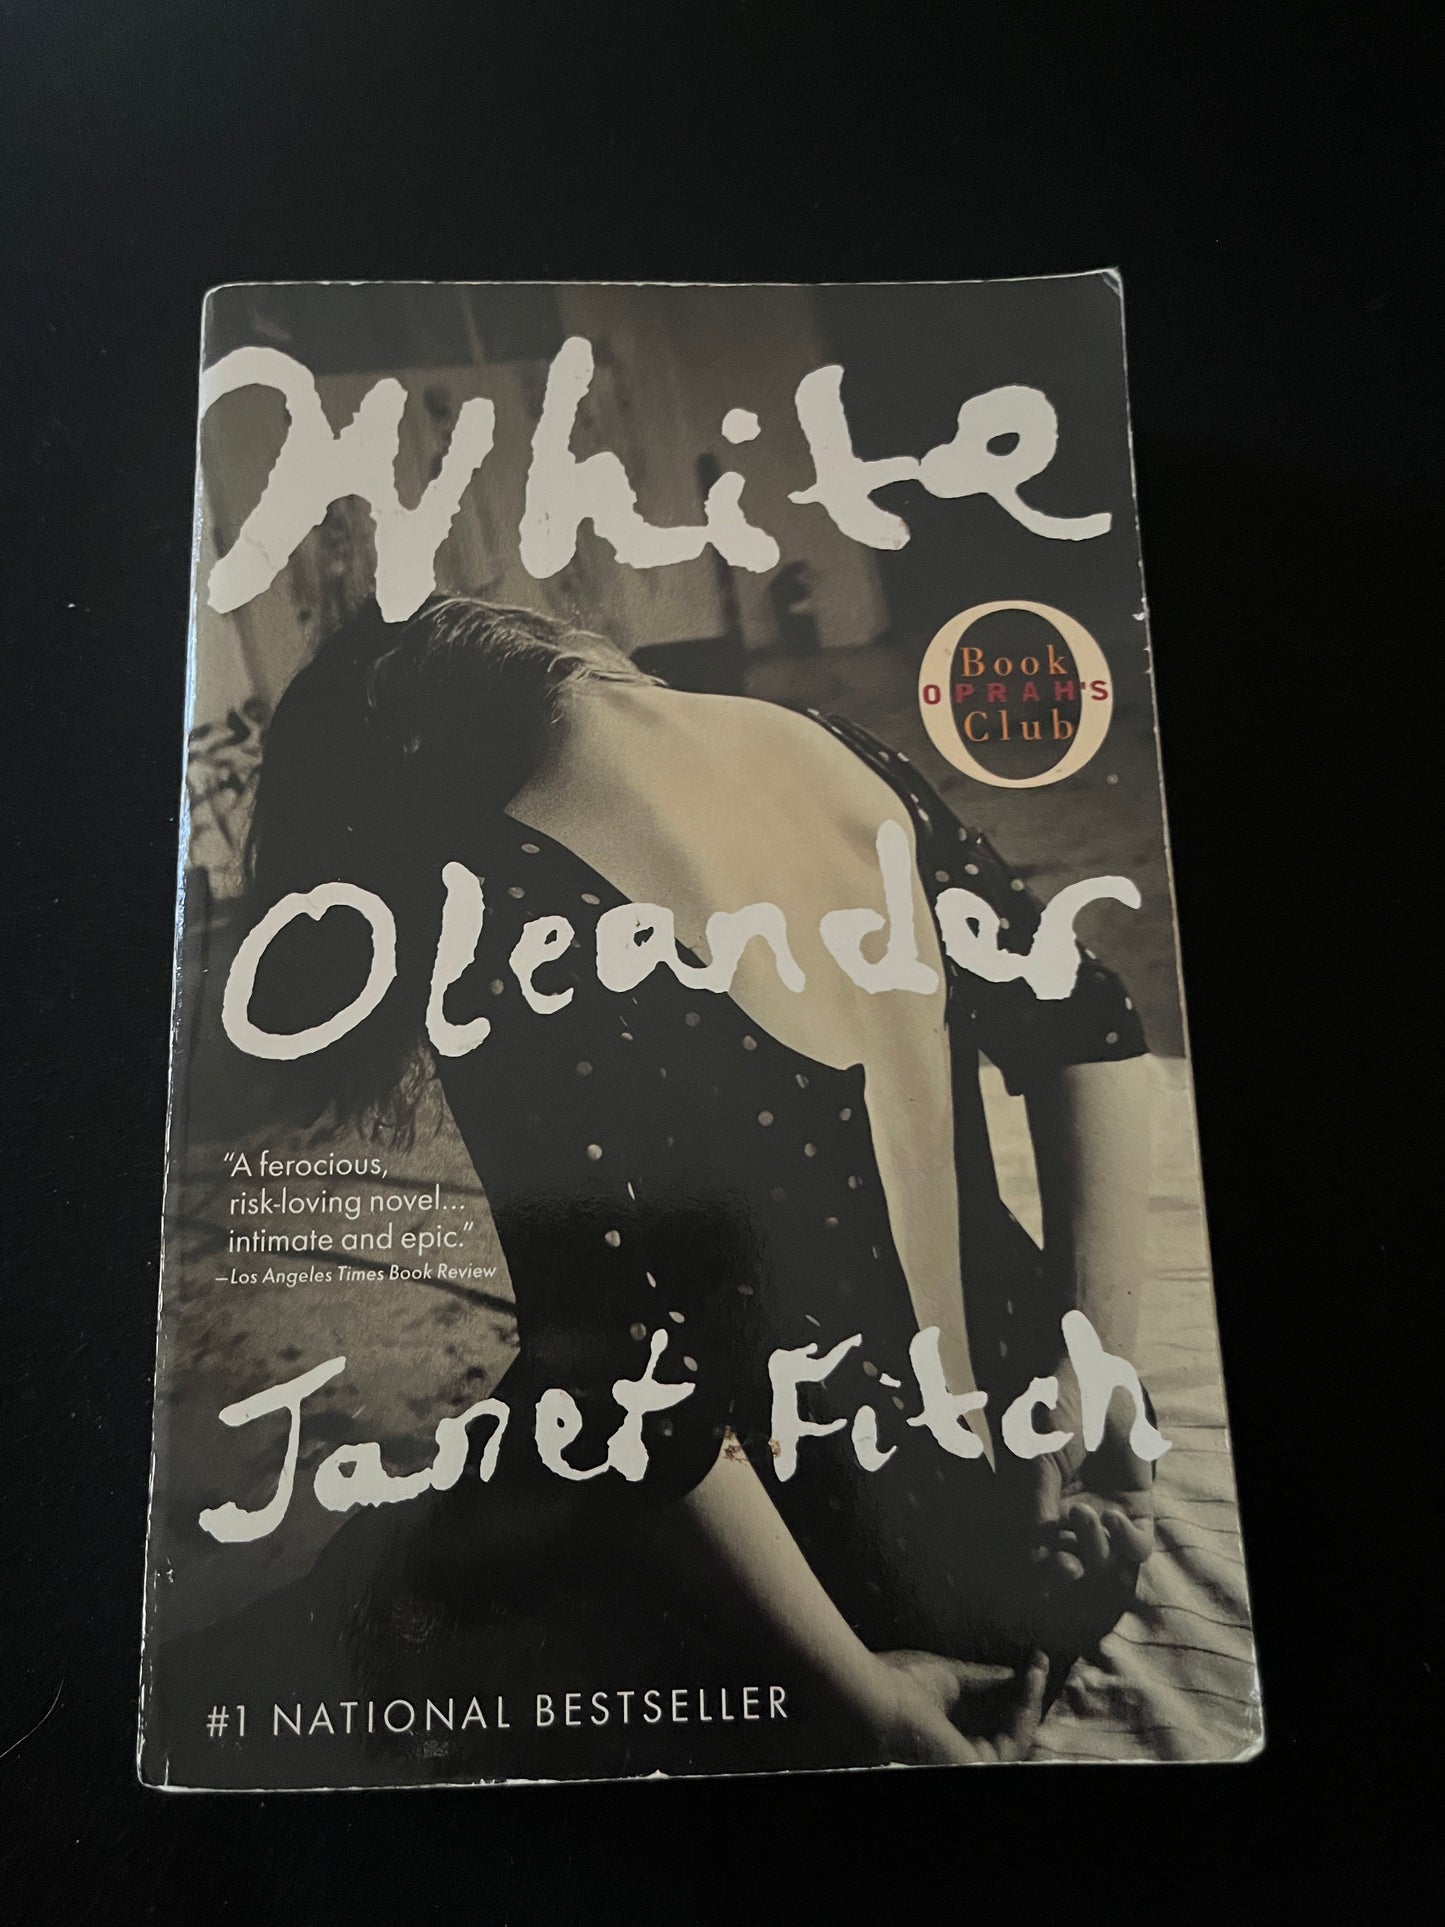 WHITE OLEANDER by Janet Fitch